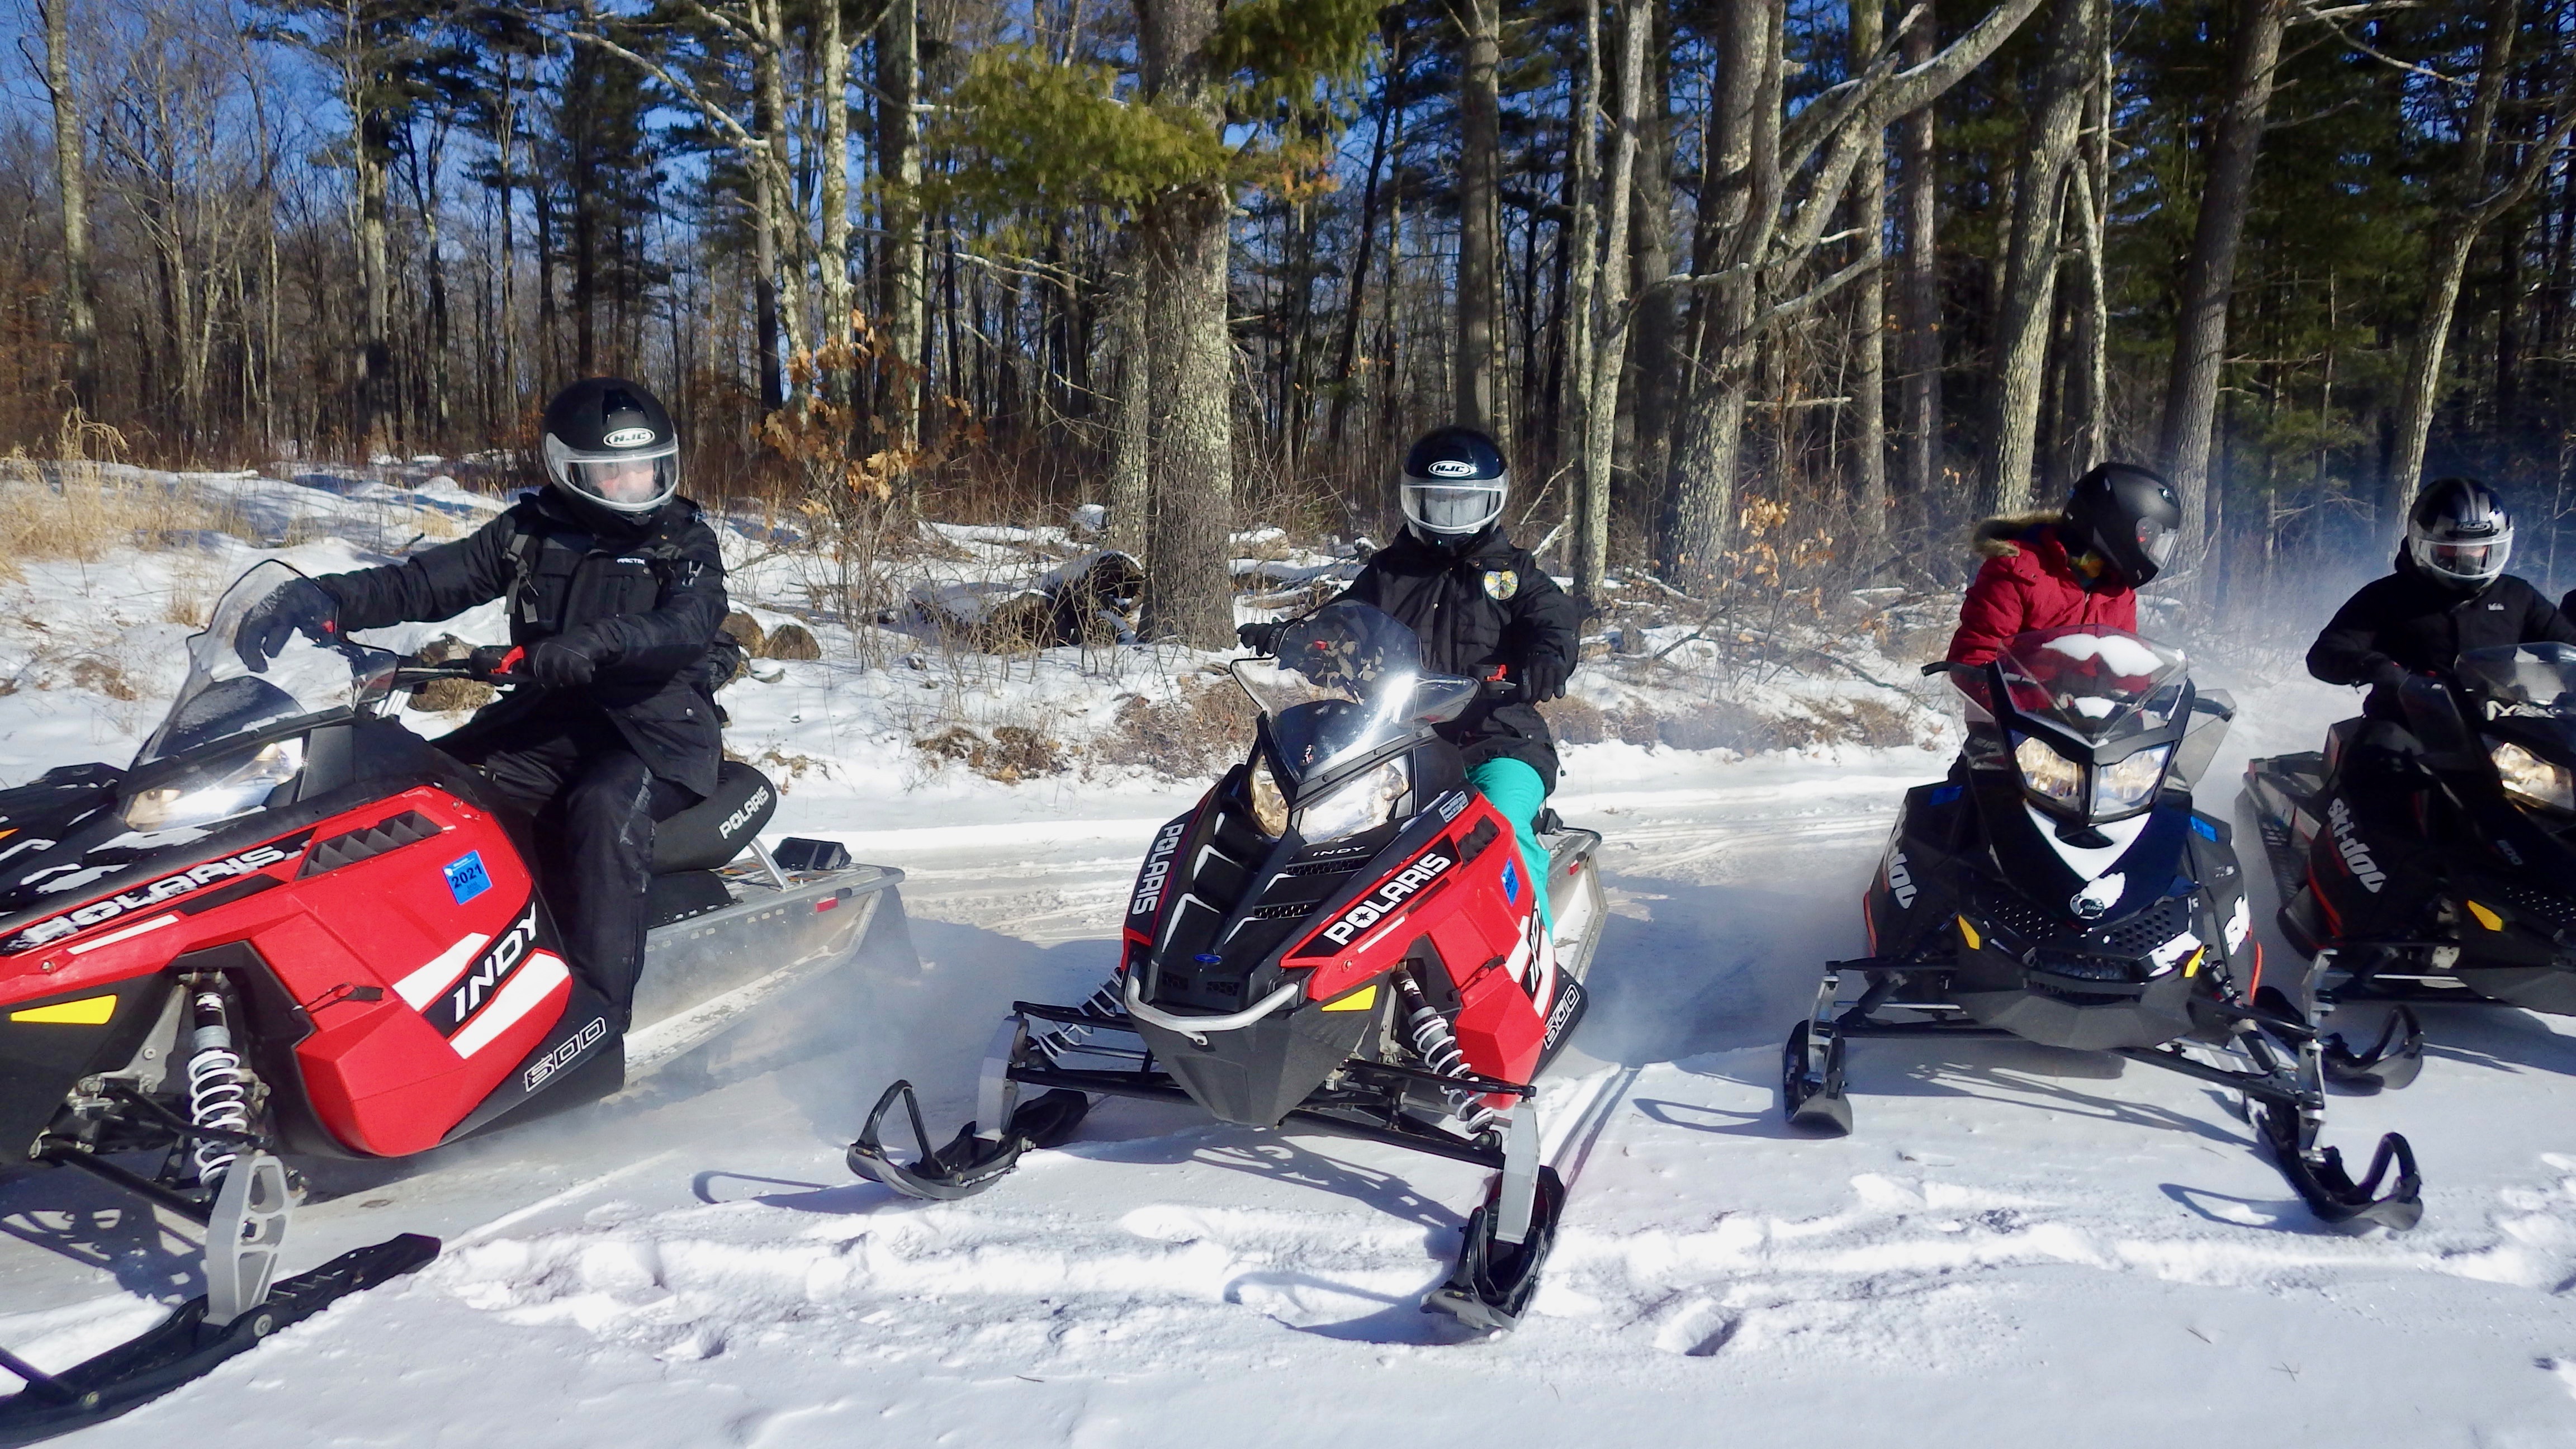 Kicking Winter Outdoor Adventure into High Gear in Hayward and Cable Wisconsin